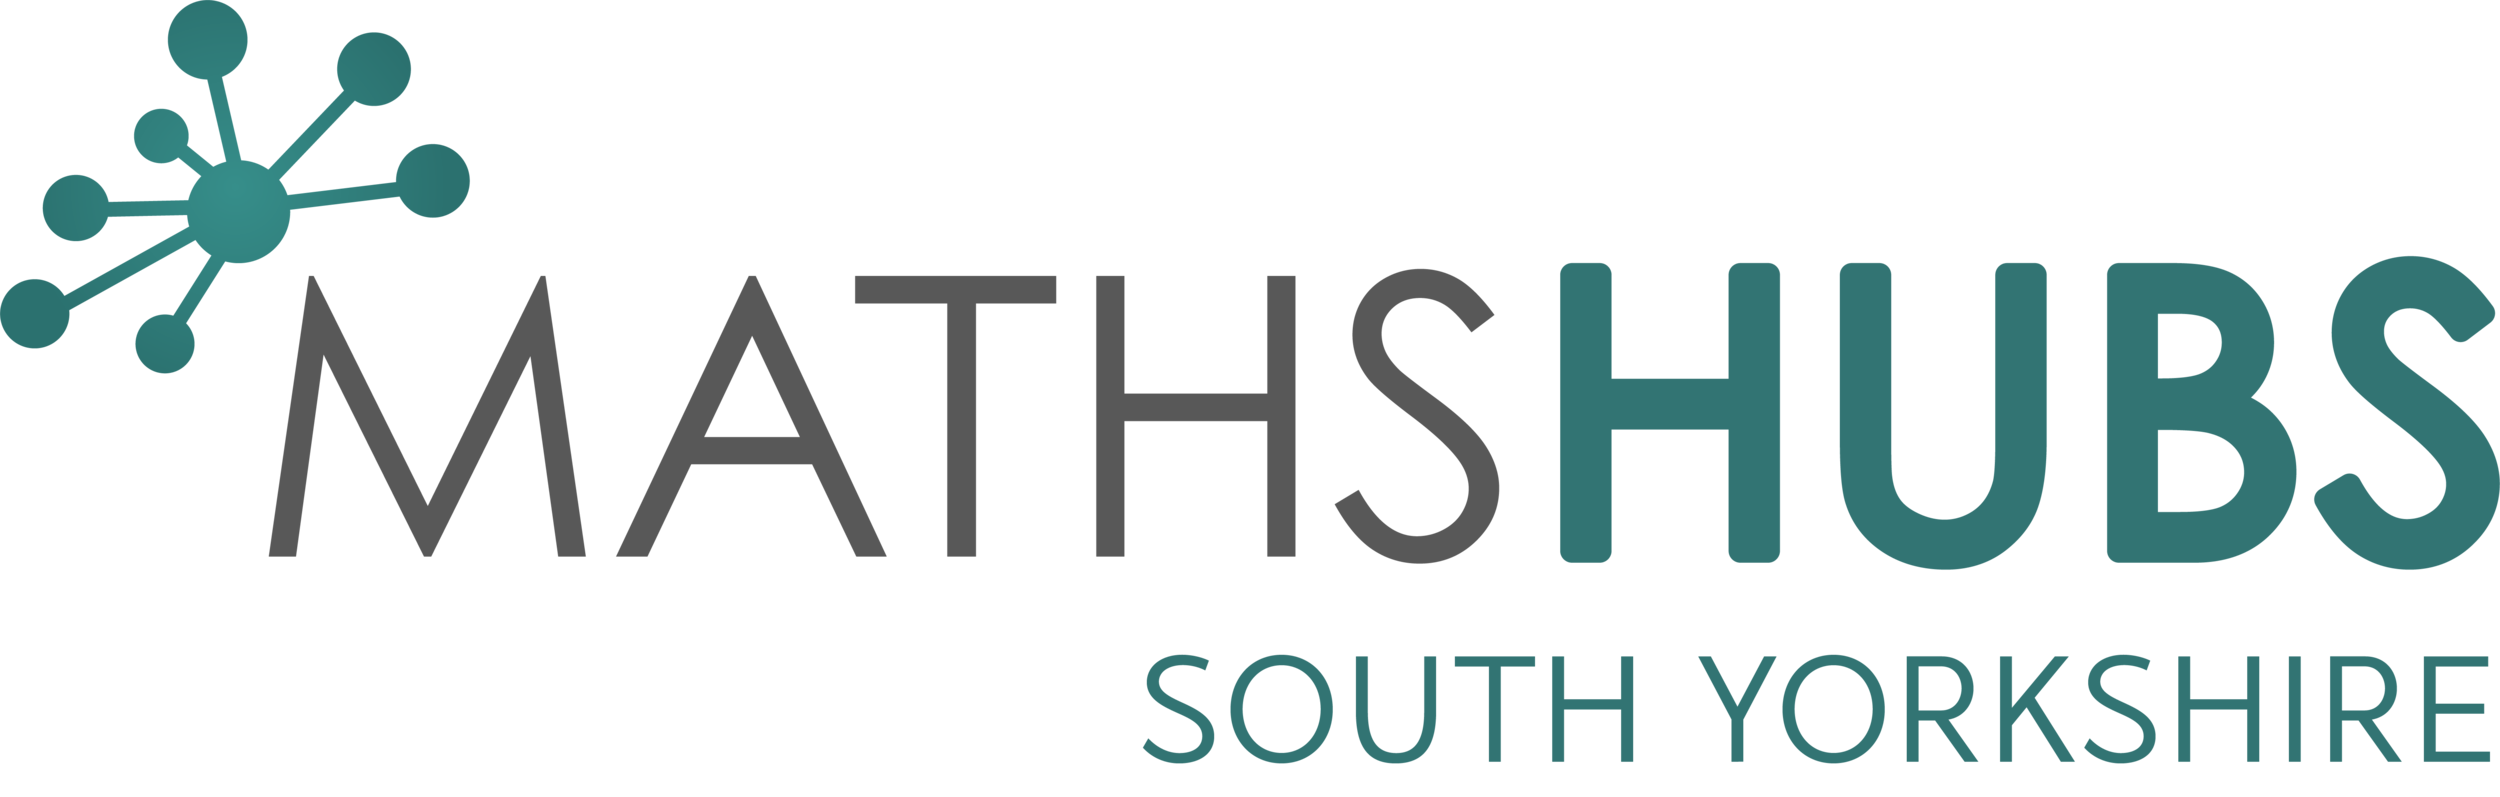 south-yorkshire-logo-m.png